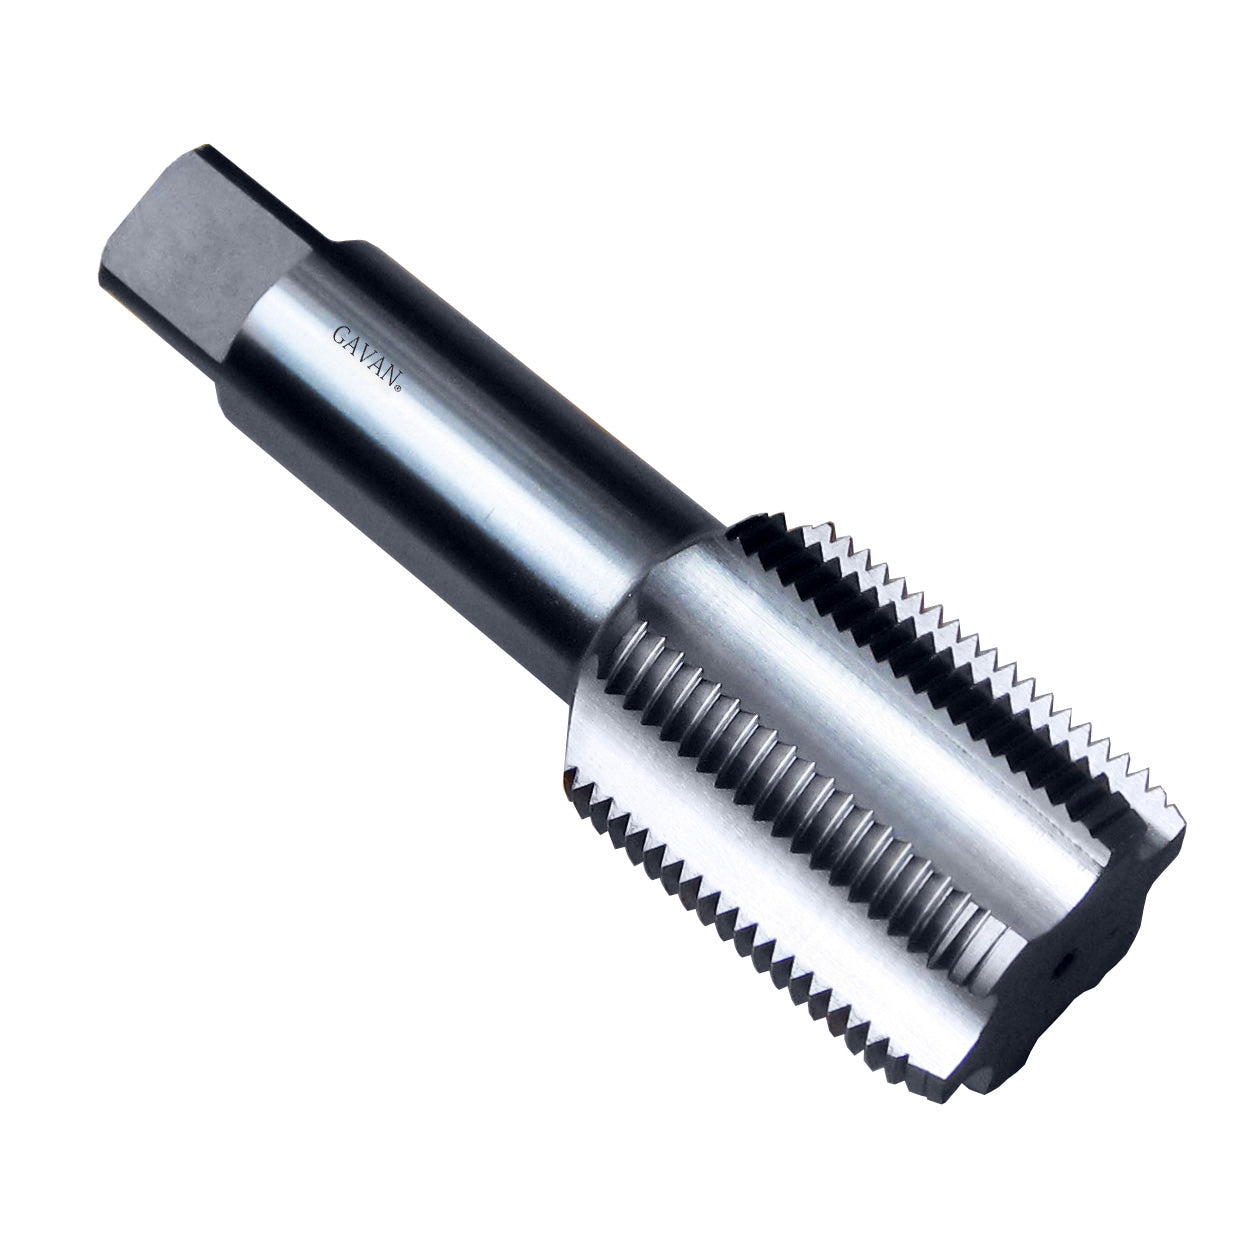 1 13/16" - 16 HSS Unified Right Hand Thread Tap